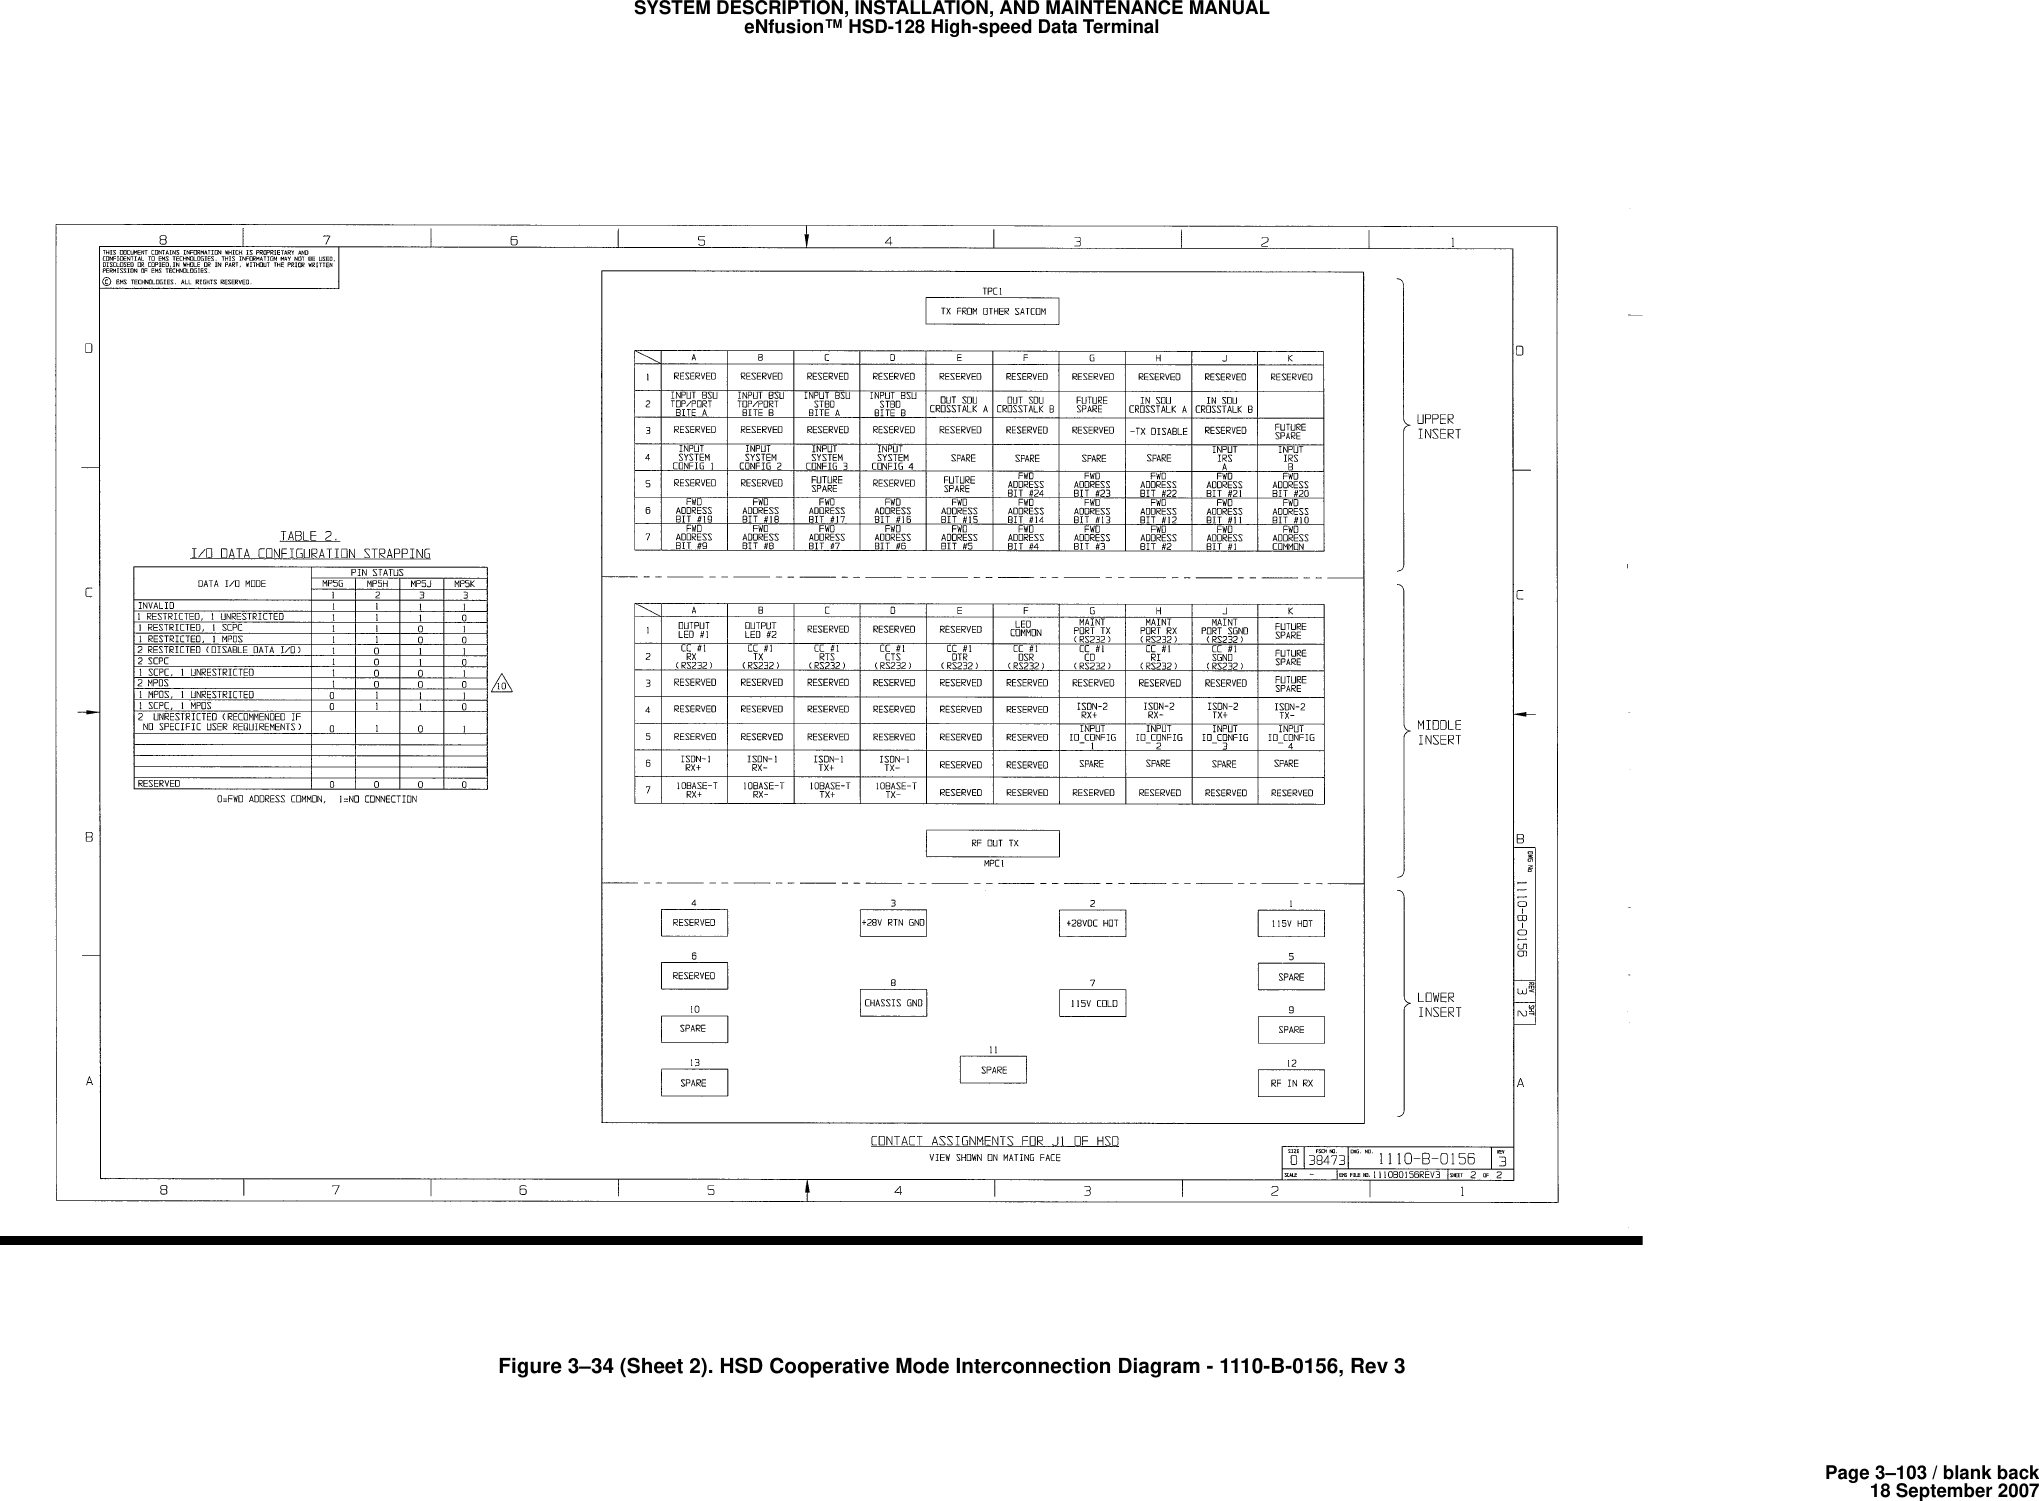 Page 3–103 / blank back18 September 2007SYSTEM DESCRIPTION, INSTALLATION, AND MAINTENANCE MANUALeNfusion™ HSD-128 High-speed Data TerminalFigure 3–34 (Sheet 2). HSD Cooperative Mode Interconnection Diagram - 1110-B-0156, Rev 3